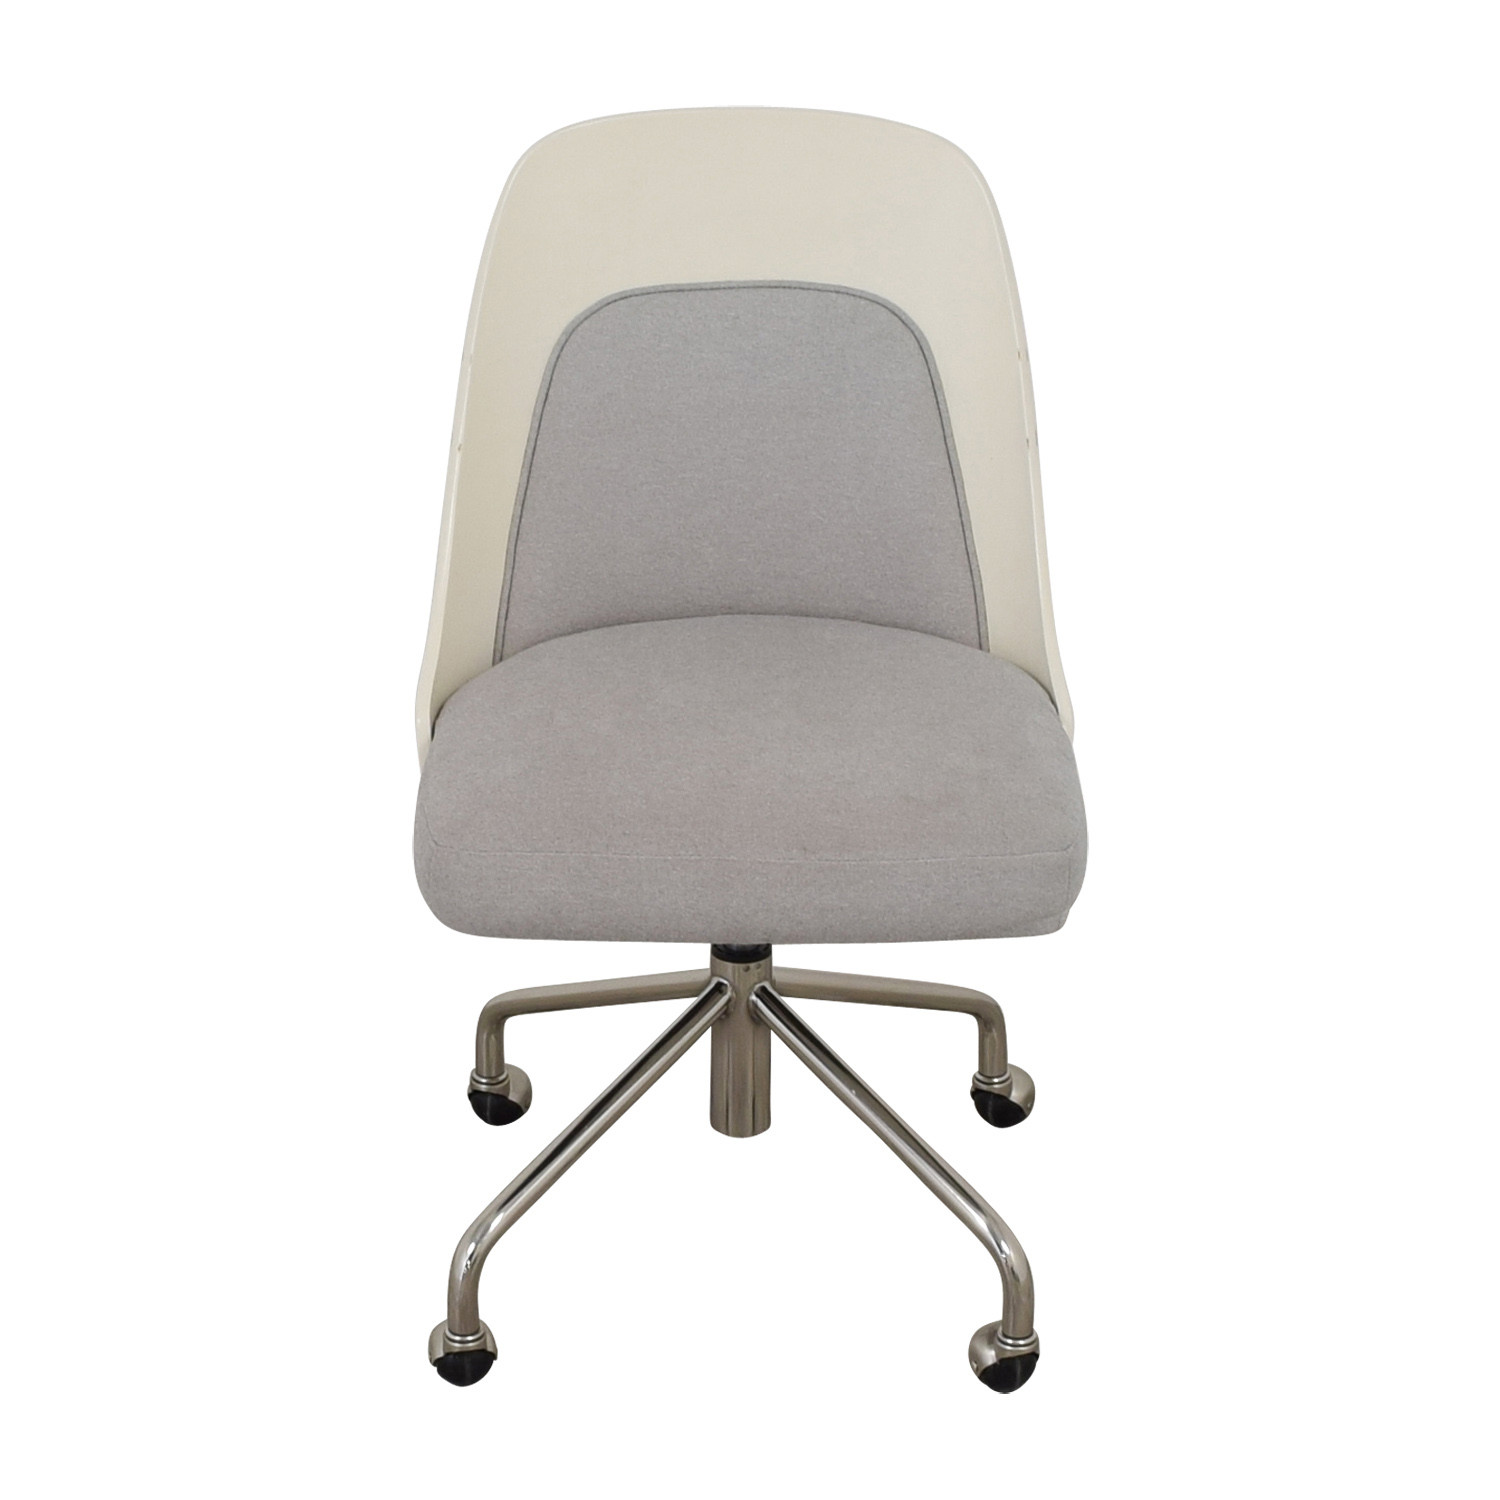 Best ideas about West Elm Office Chair
. Save or Pin OFF West Elm West Elm Bentwood White and Grey fice Now.